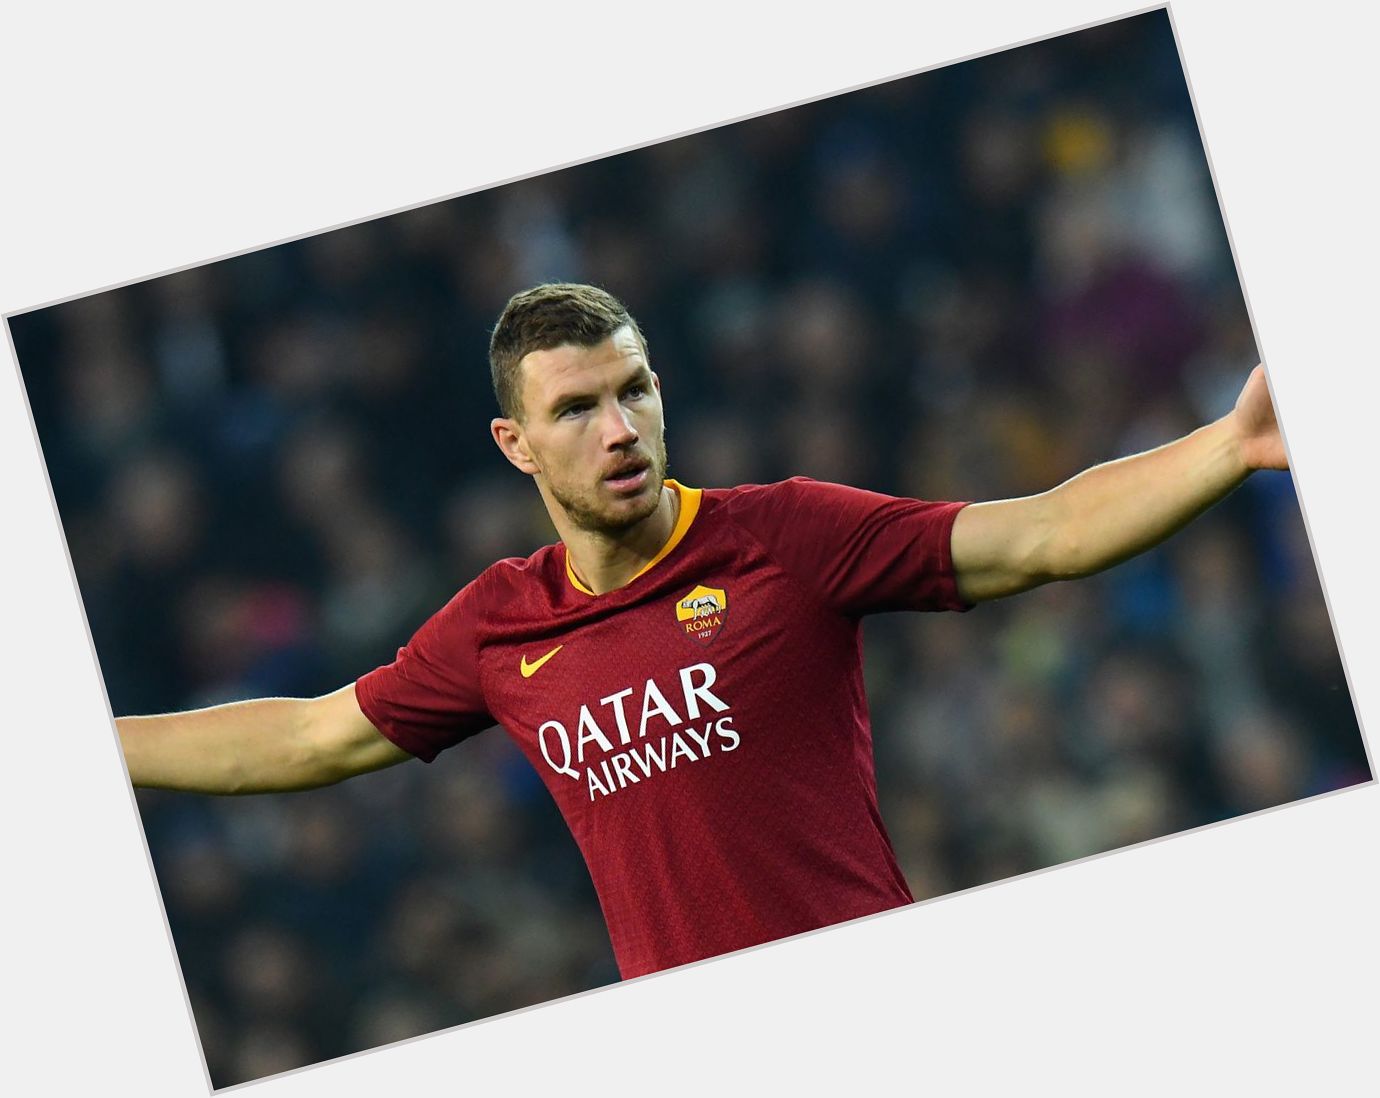 Happy birthday Edin Dzeko. The former striker is currently playing in Italy for 